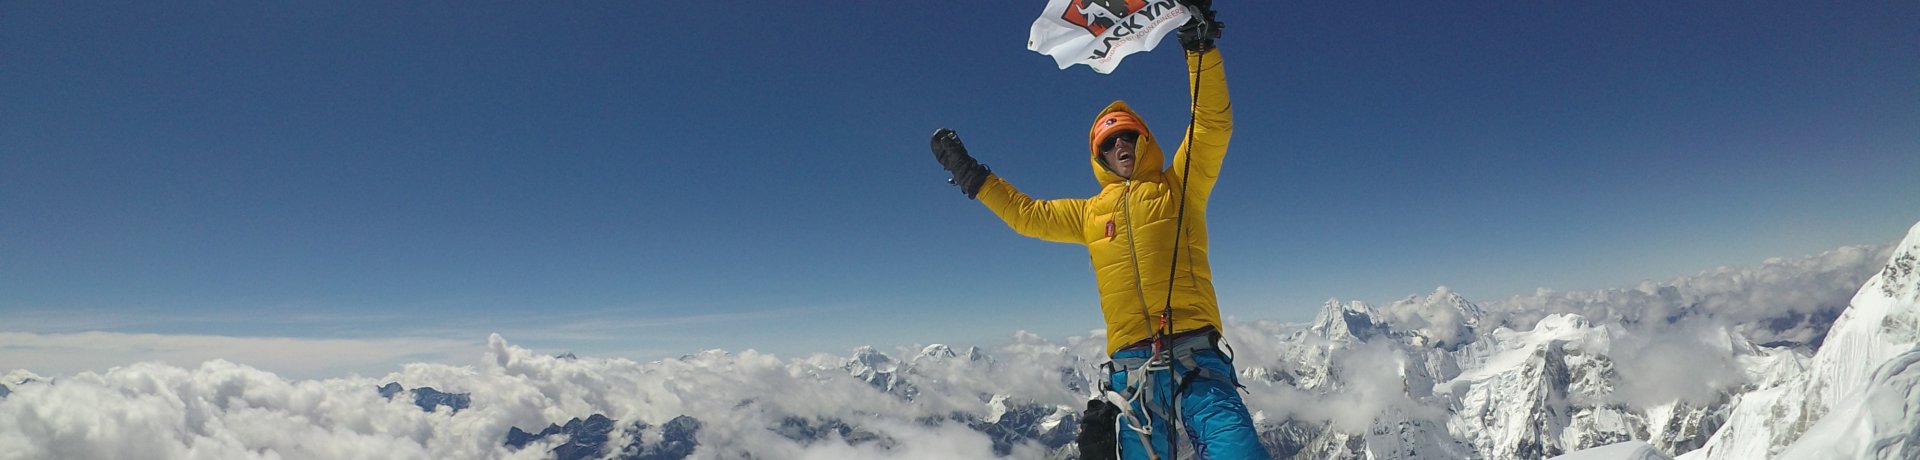 Jost Kobusch feels comfortable in extreme terrain, at extreme temperatures